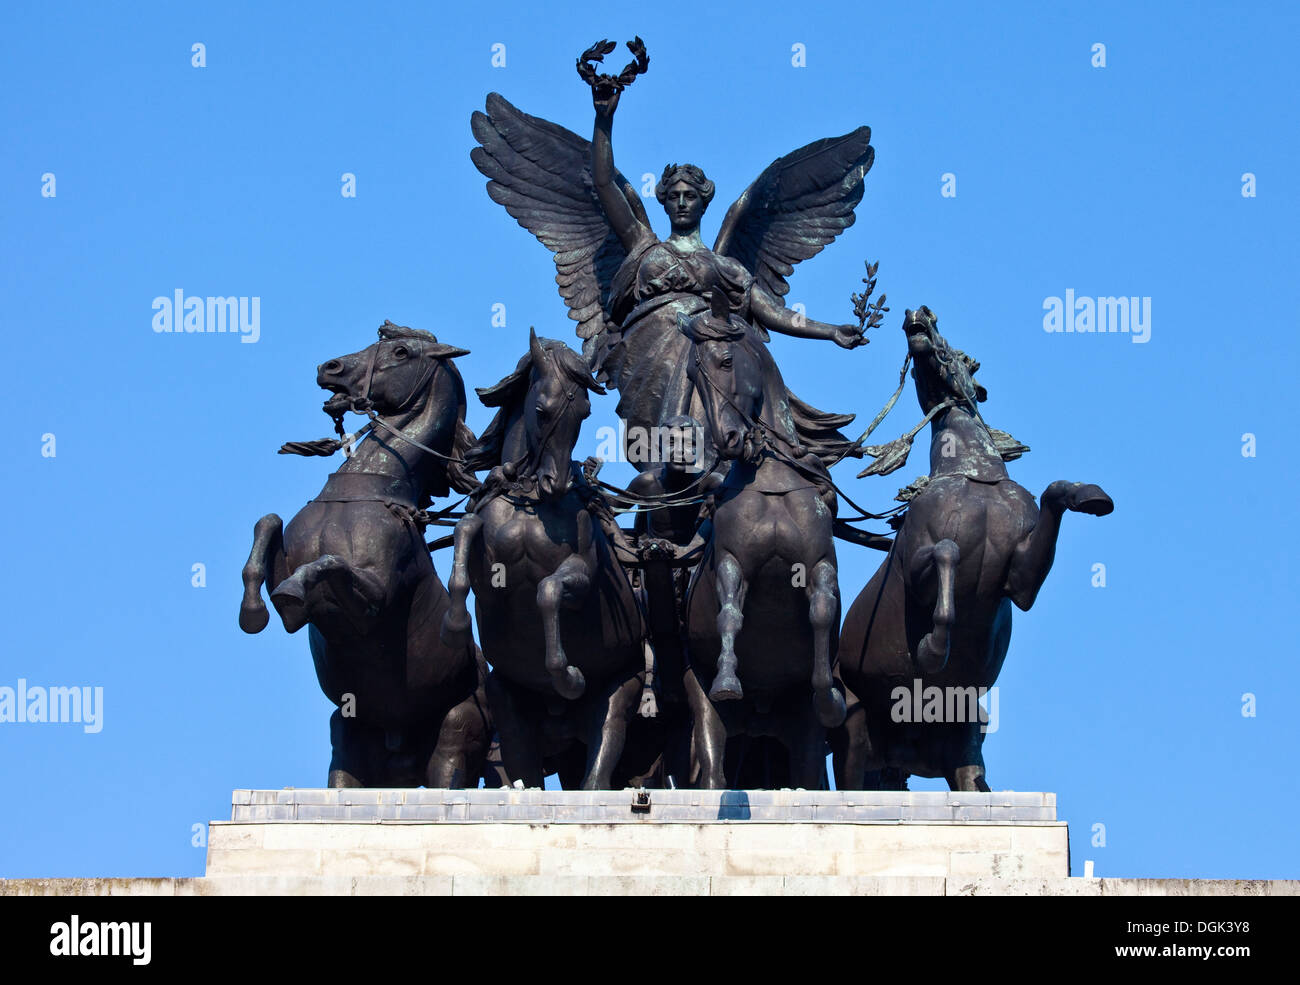 The Quadriga that sits ontop of the Wellington Arch in London. Stock Photo